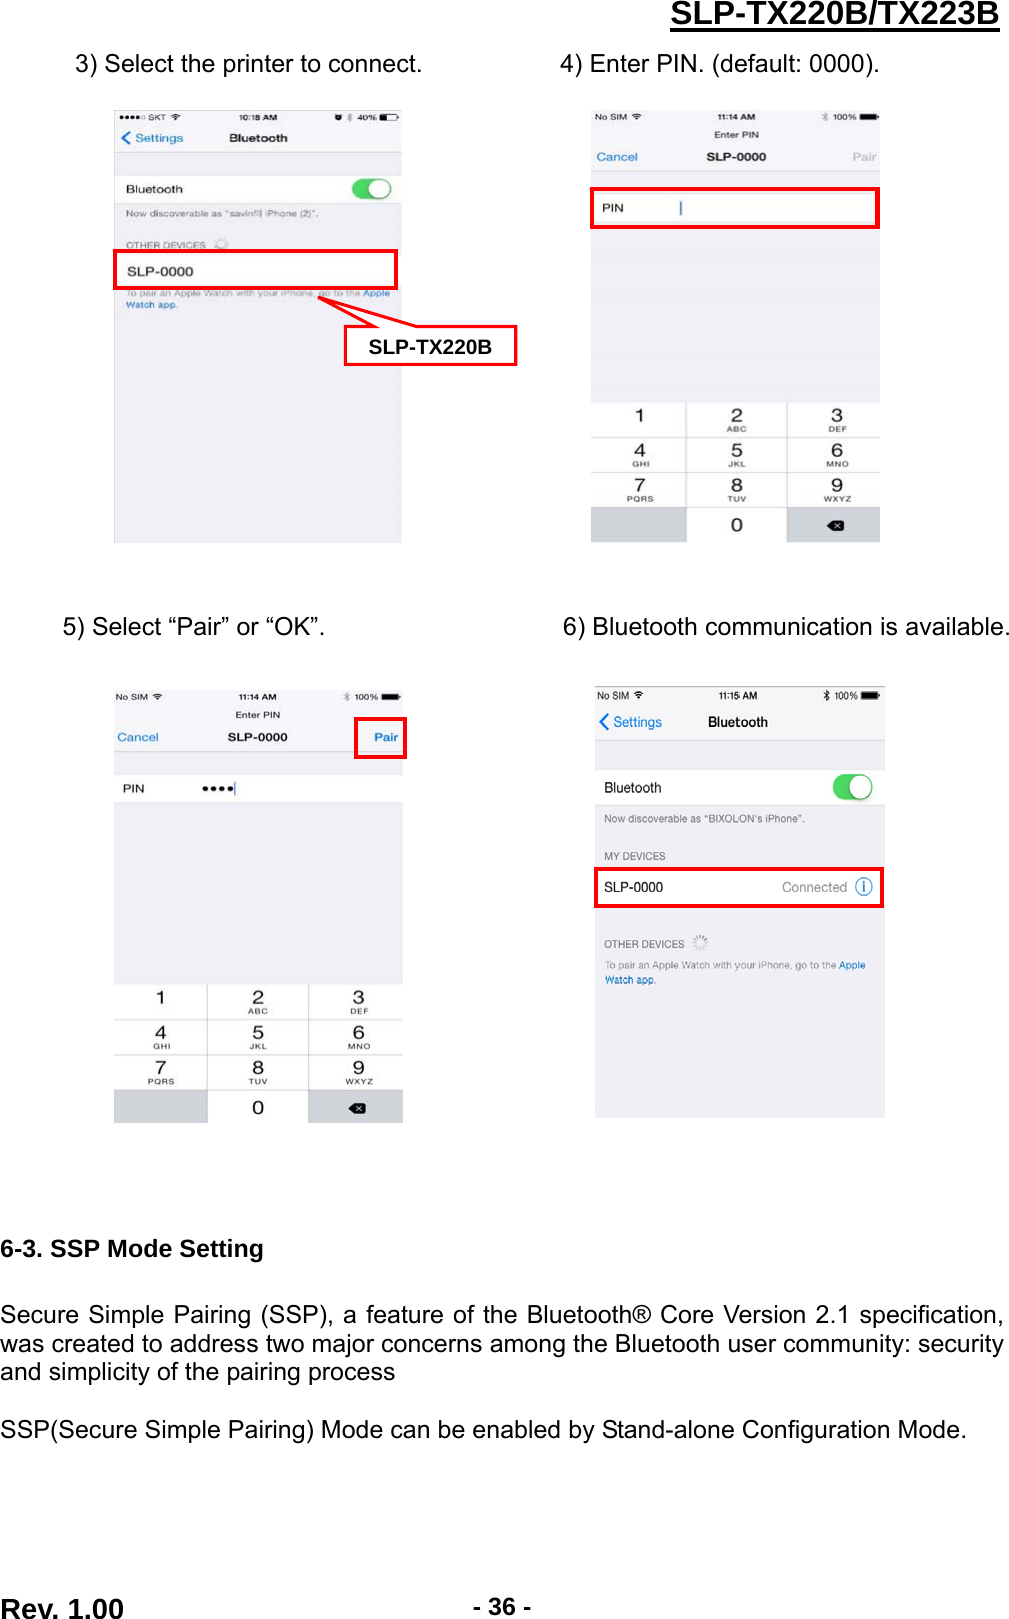  Rev. 1.00  - 36 -SLP-TX220B/TX223B3) Select the printer to connect.           4) Enter PIN. (default: 0000).                        5) Select “Pair” or “OK”.                   6) Bluetooth communication is available.                     6-3. SSP Mode Setting  Secure Simple Pairing (SSP), a feature of the Bluetooth® Core Version 2.1 specification, was created to address two major concerns among the Bluetooth user community: security and simplicity of the pairing process  SSP(Secure Simple Pairing) Mode can be enabled by Stand-alone Configuration Mode.  SLP-TX220B 